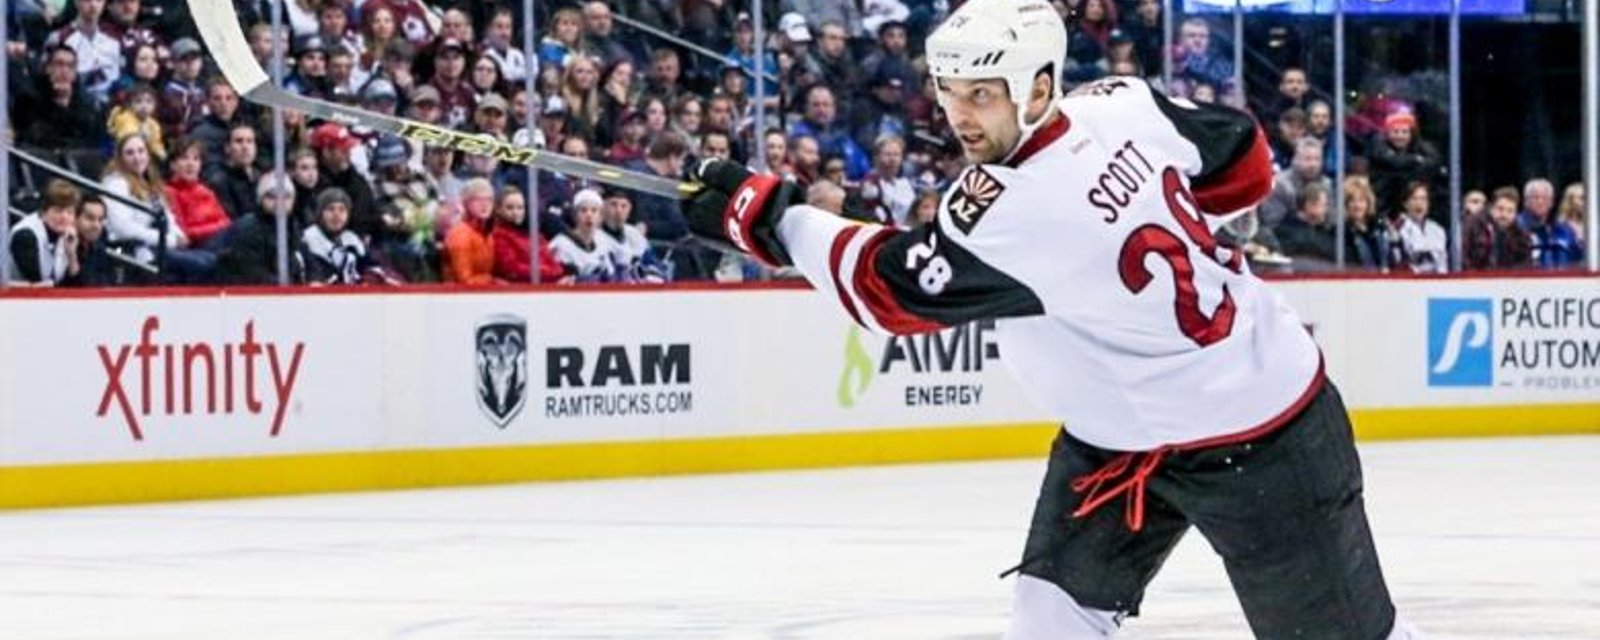 John Scott will participate in not one, but two skills events tomorrow night.